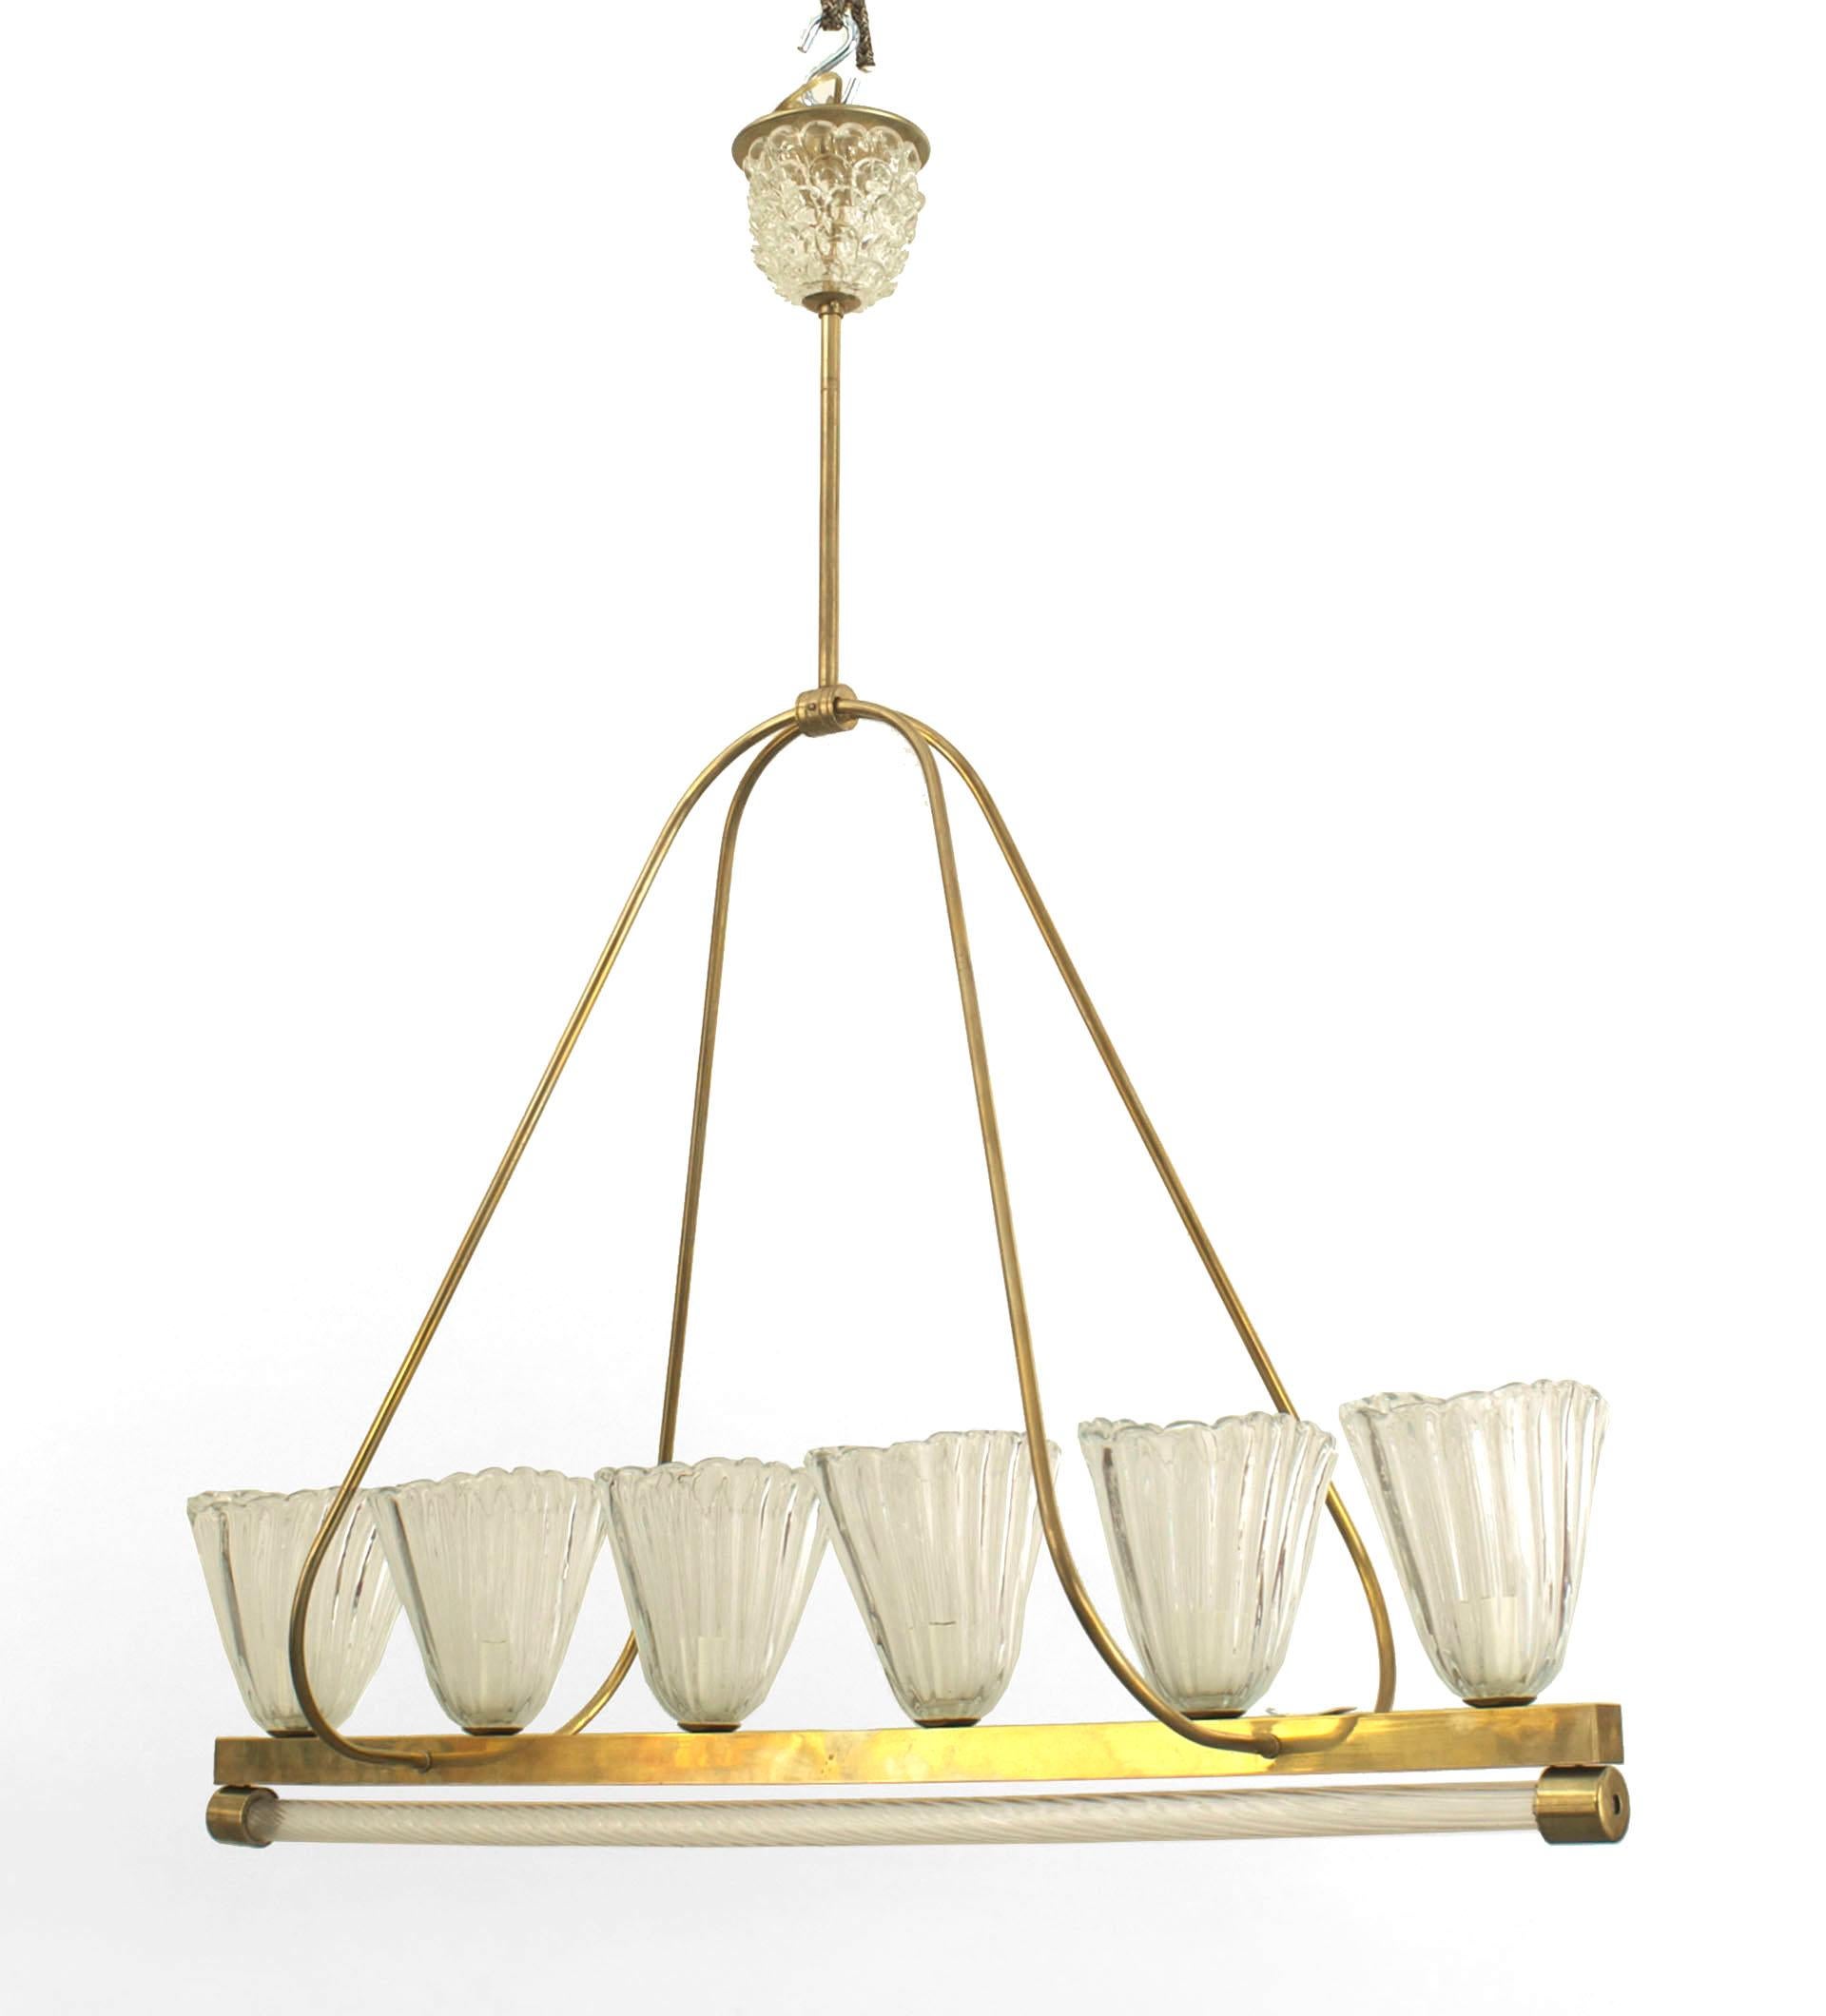 Italian mid-century (1940s) chandelier with a line of 6 large oval fluted & flared shaped glass shades resting on a brass frame over a swirl glass tube bottom suspended by a double loop frame. (BAROVIER ET TOSO).
 